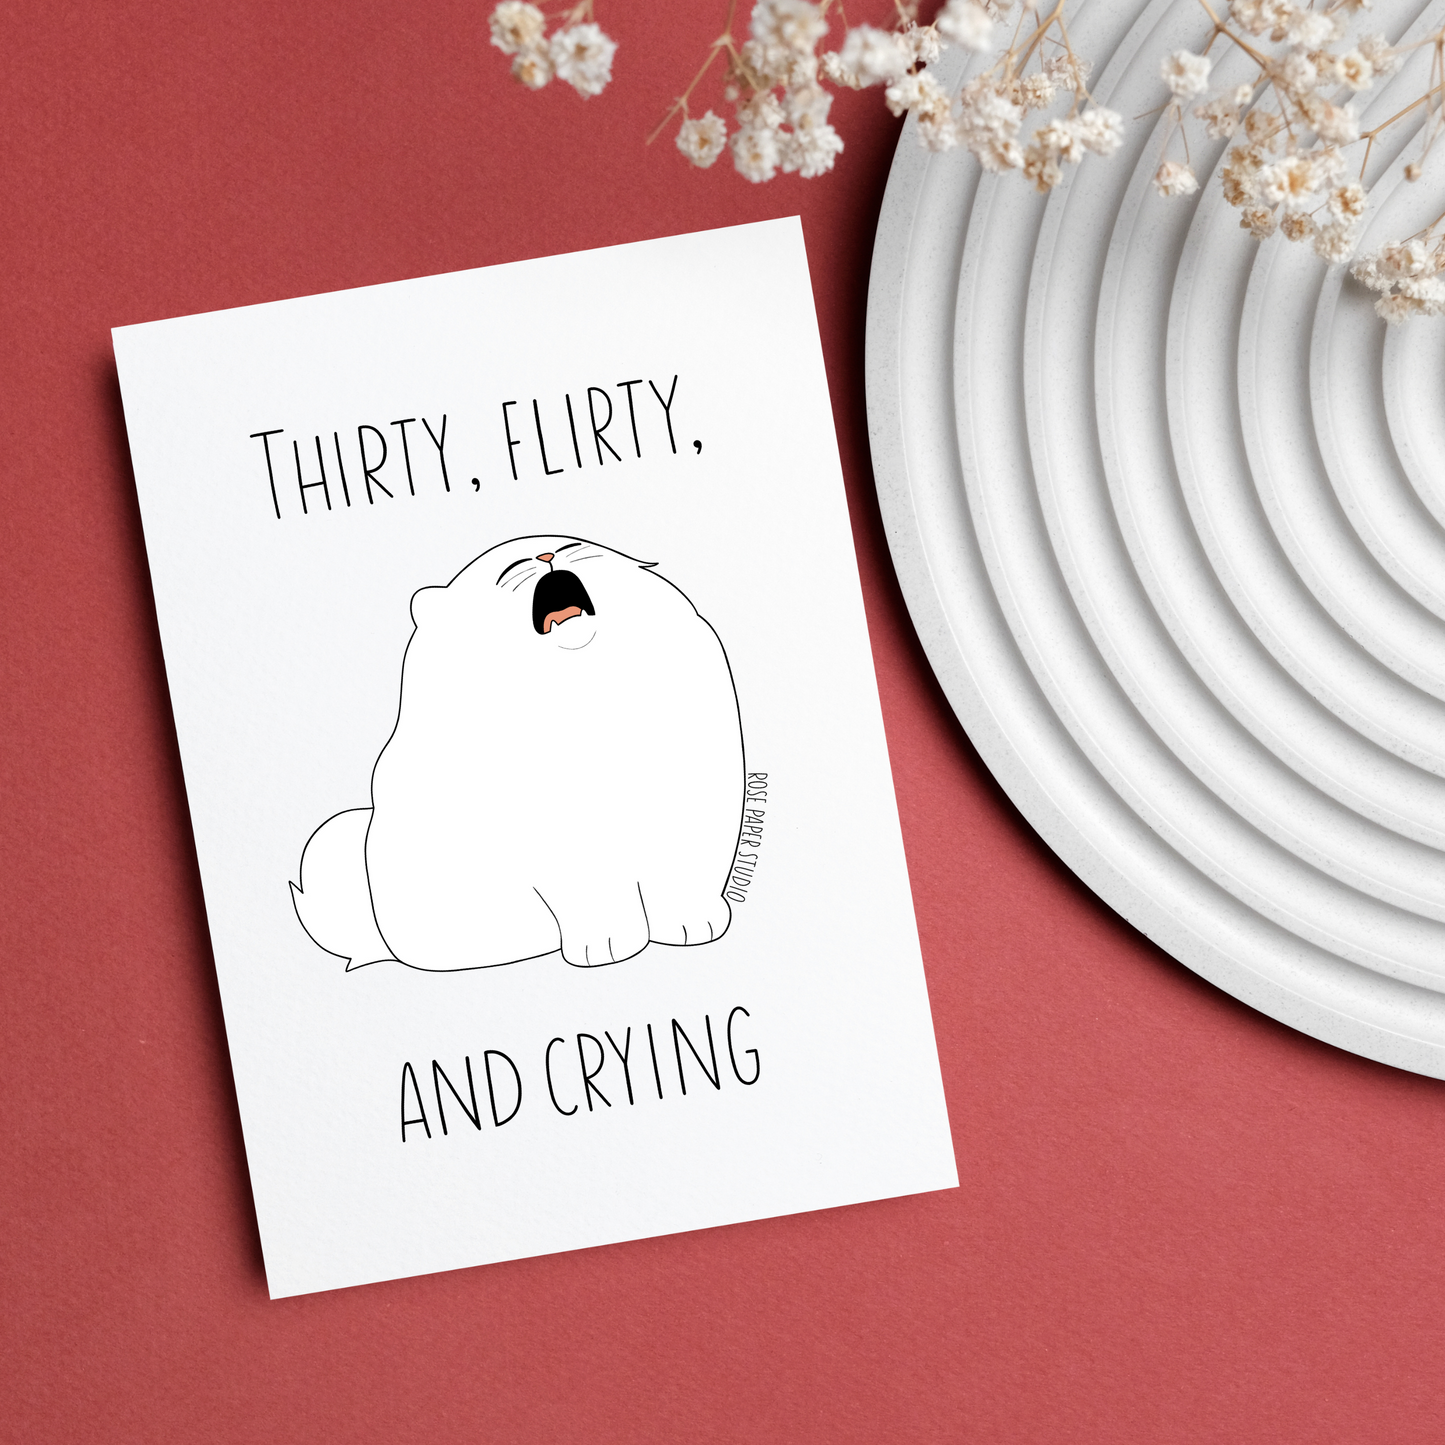 Thirty, Flirty, and Crying Card | Magda the Crying Cat Drawing | 30th Birthday Card | Funny Friend Birthday Card | Hand Drawn Modern Calligraphy Card